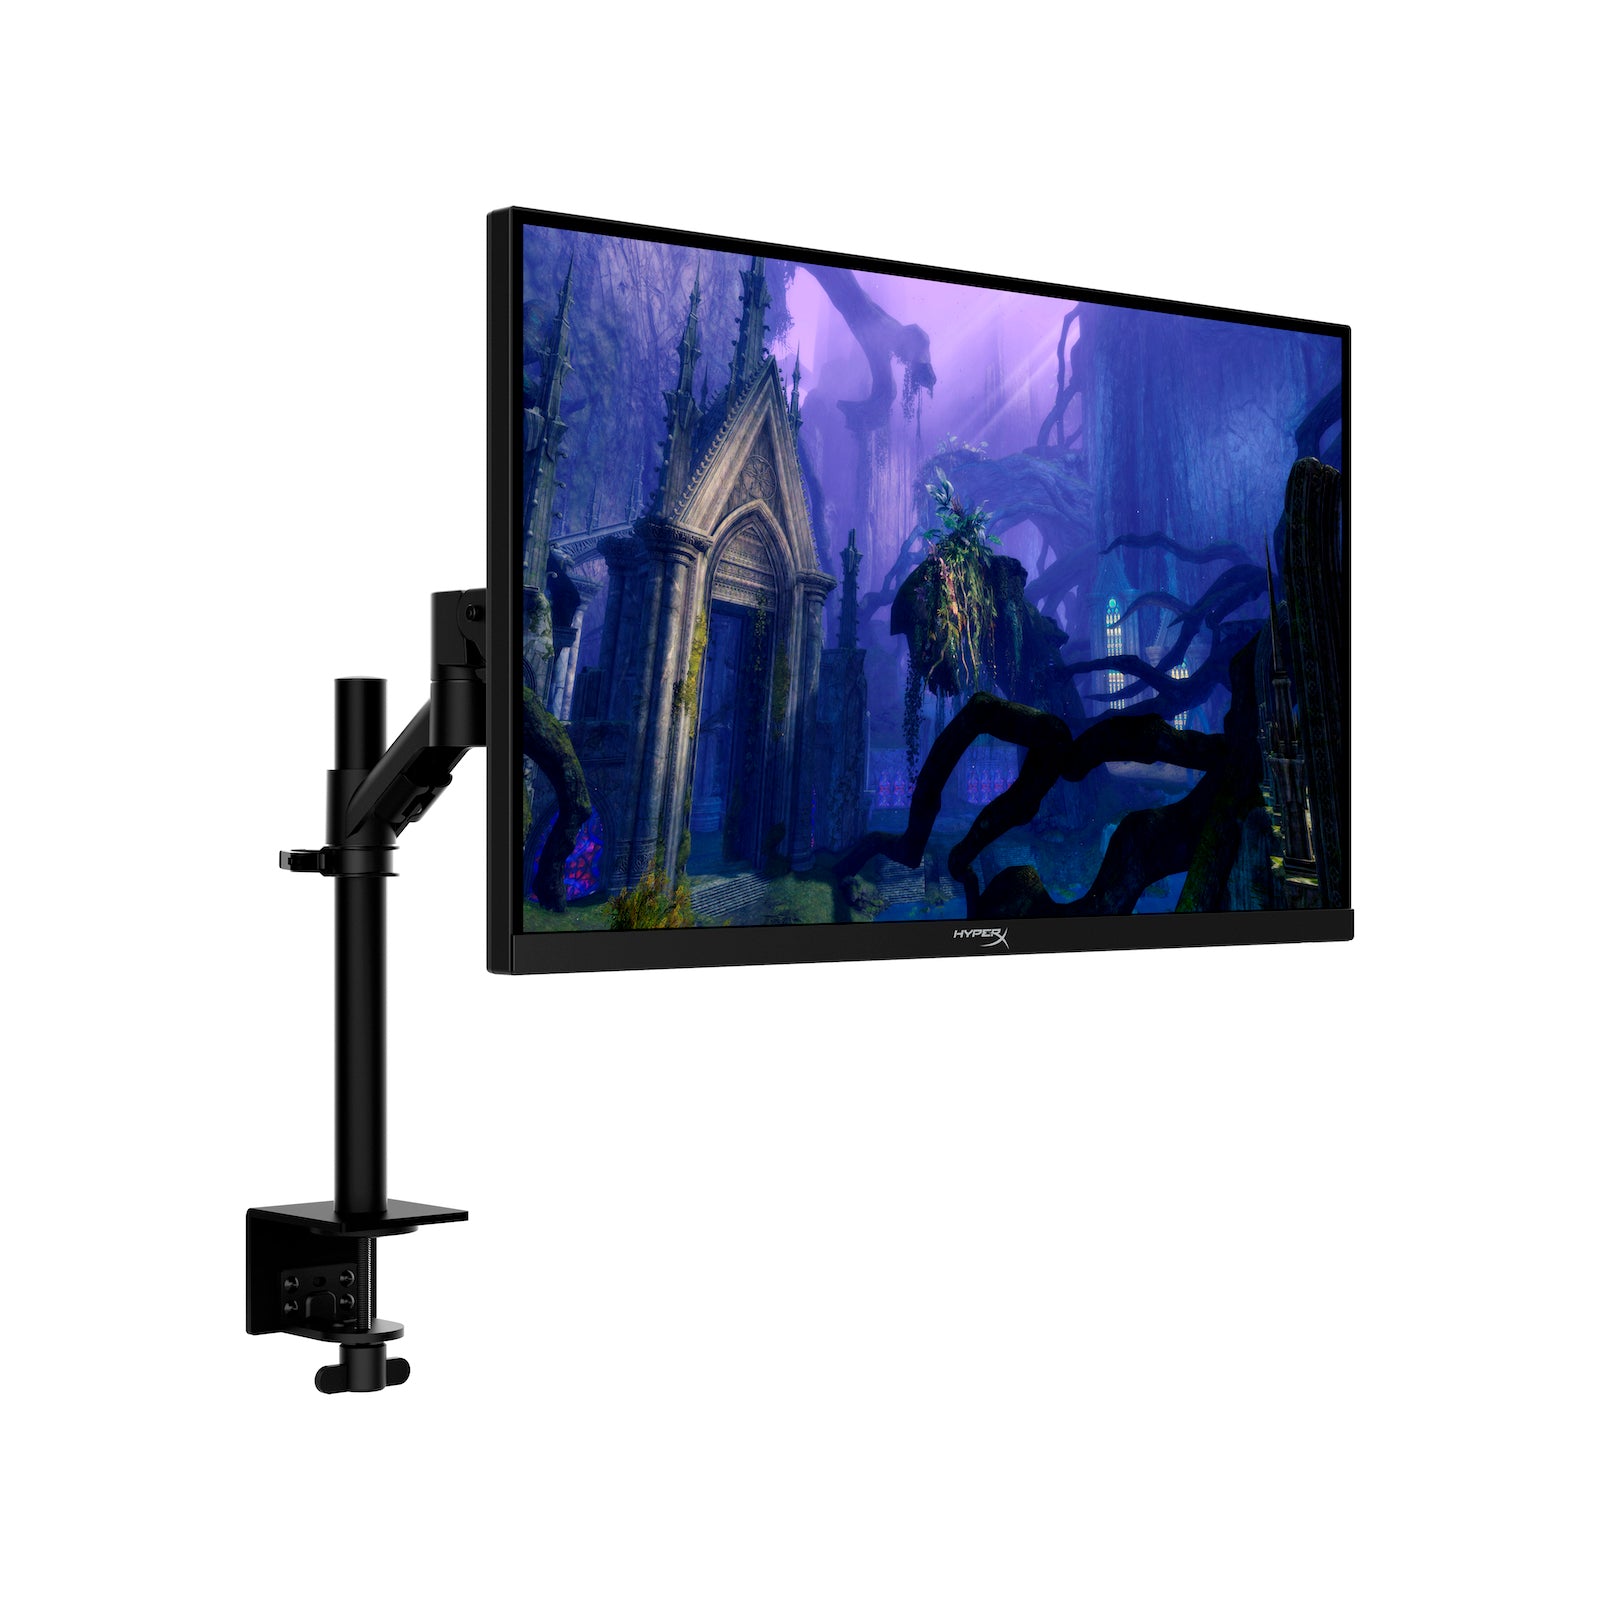 HyperX Armada 27 QHD Gaming Monitor with arm showing the right front hand side view featuring Higher resolution for immersive gaming